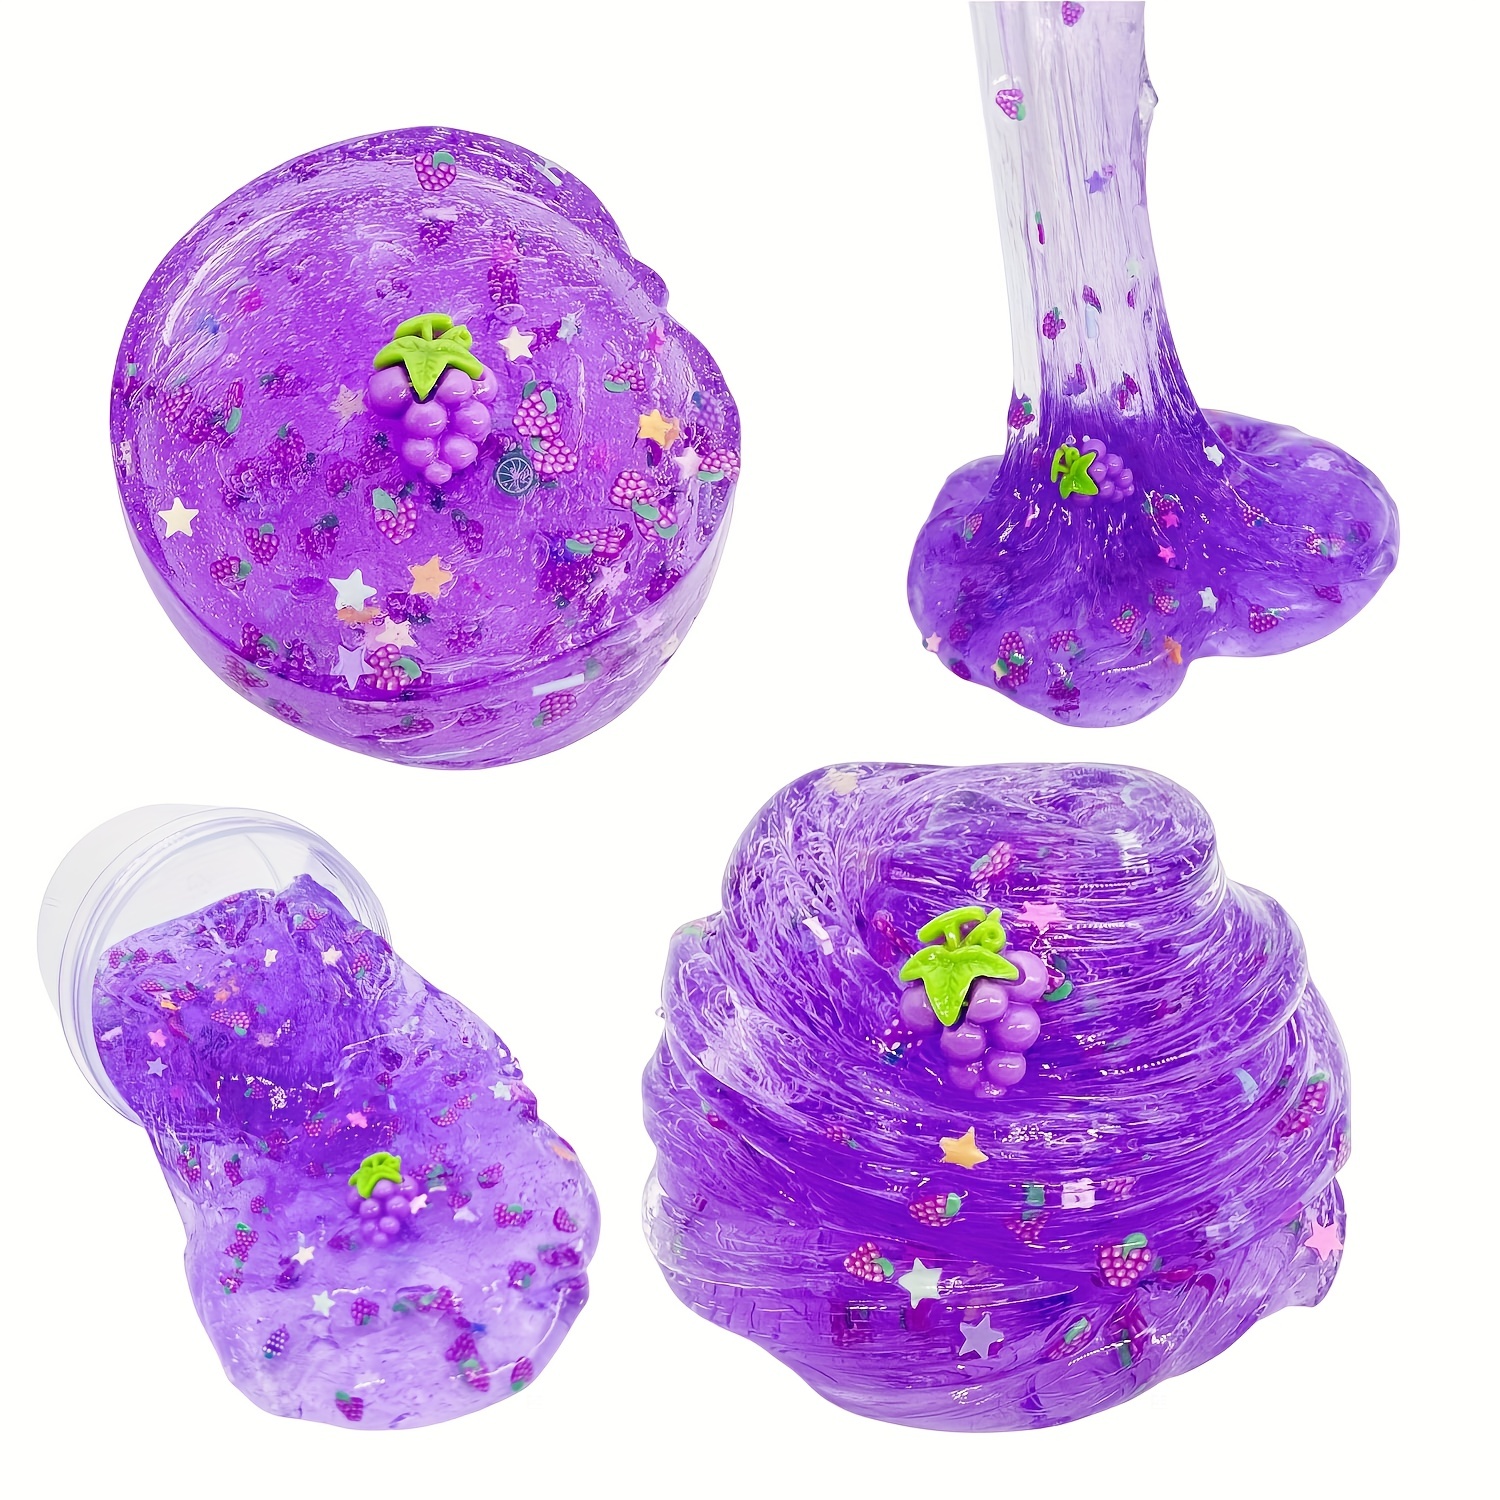 Cuoff Toy DIY Slime Supplies Fruit Slime Aromatherapy Pressure Children Slime Toy(70ml), Size: One size, Purple